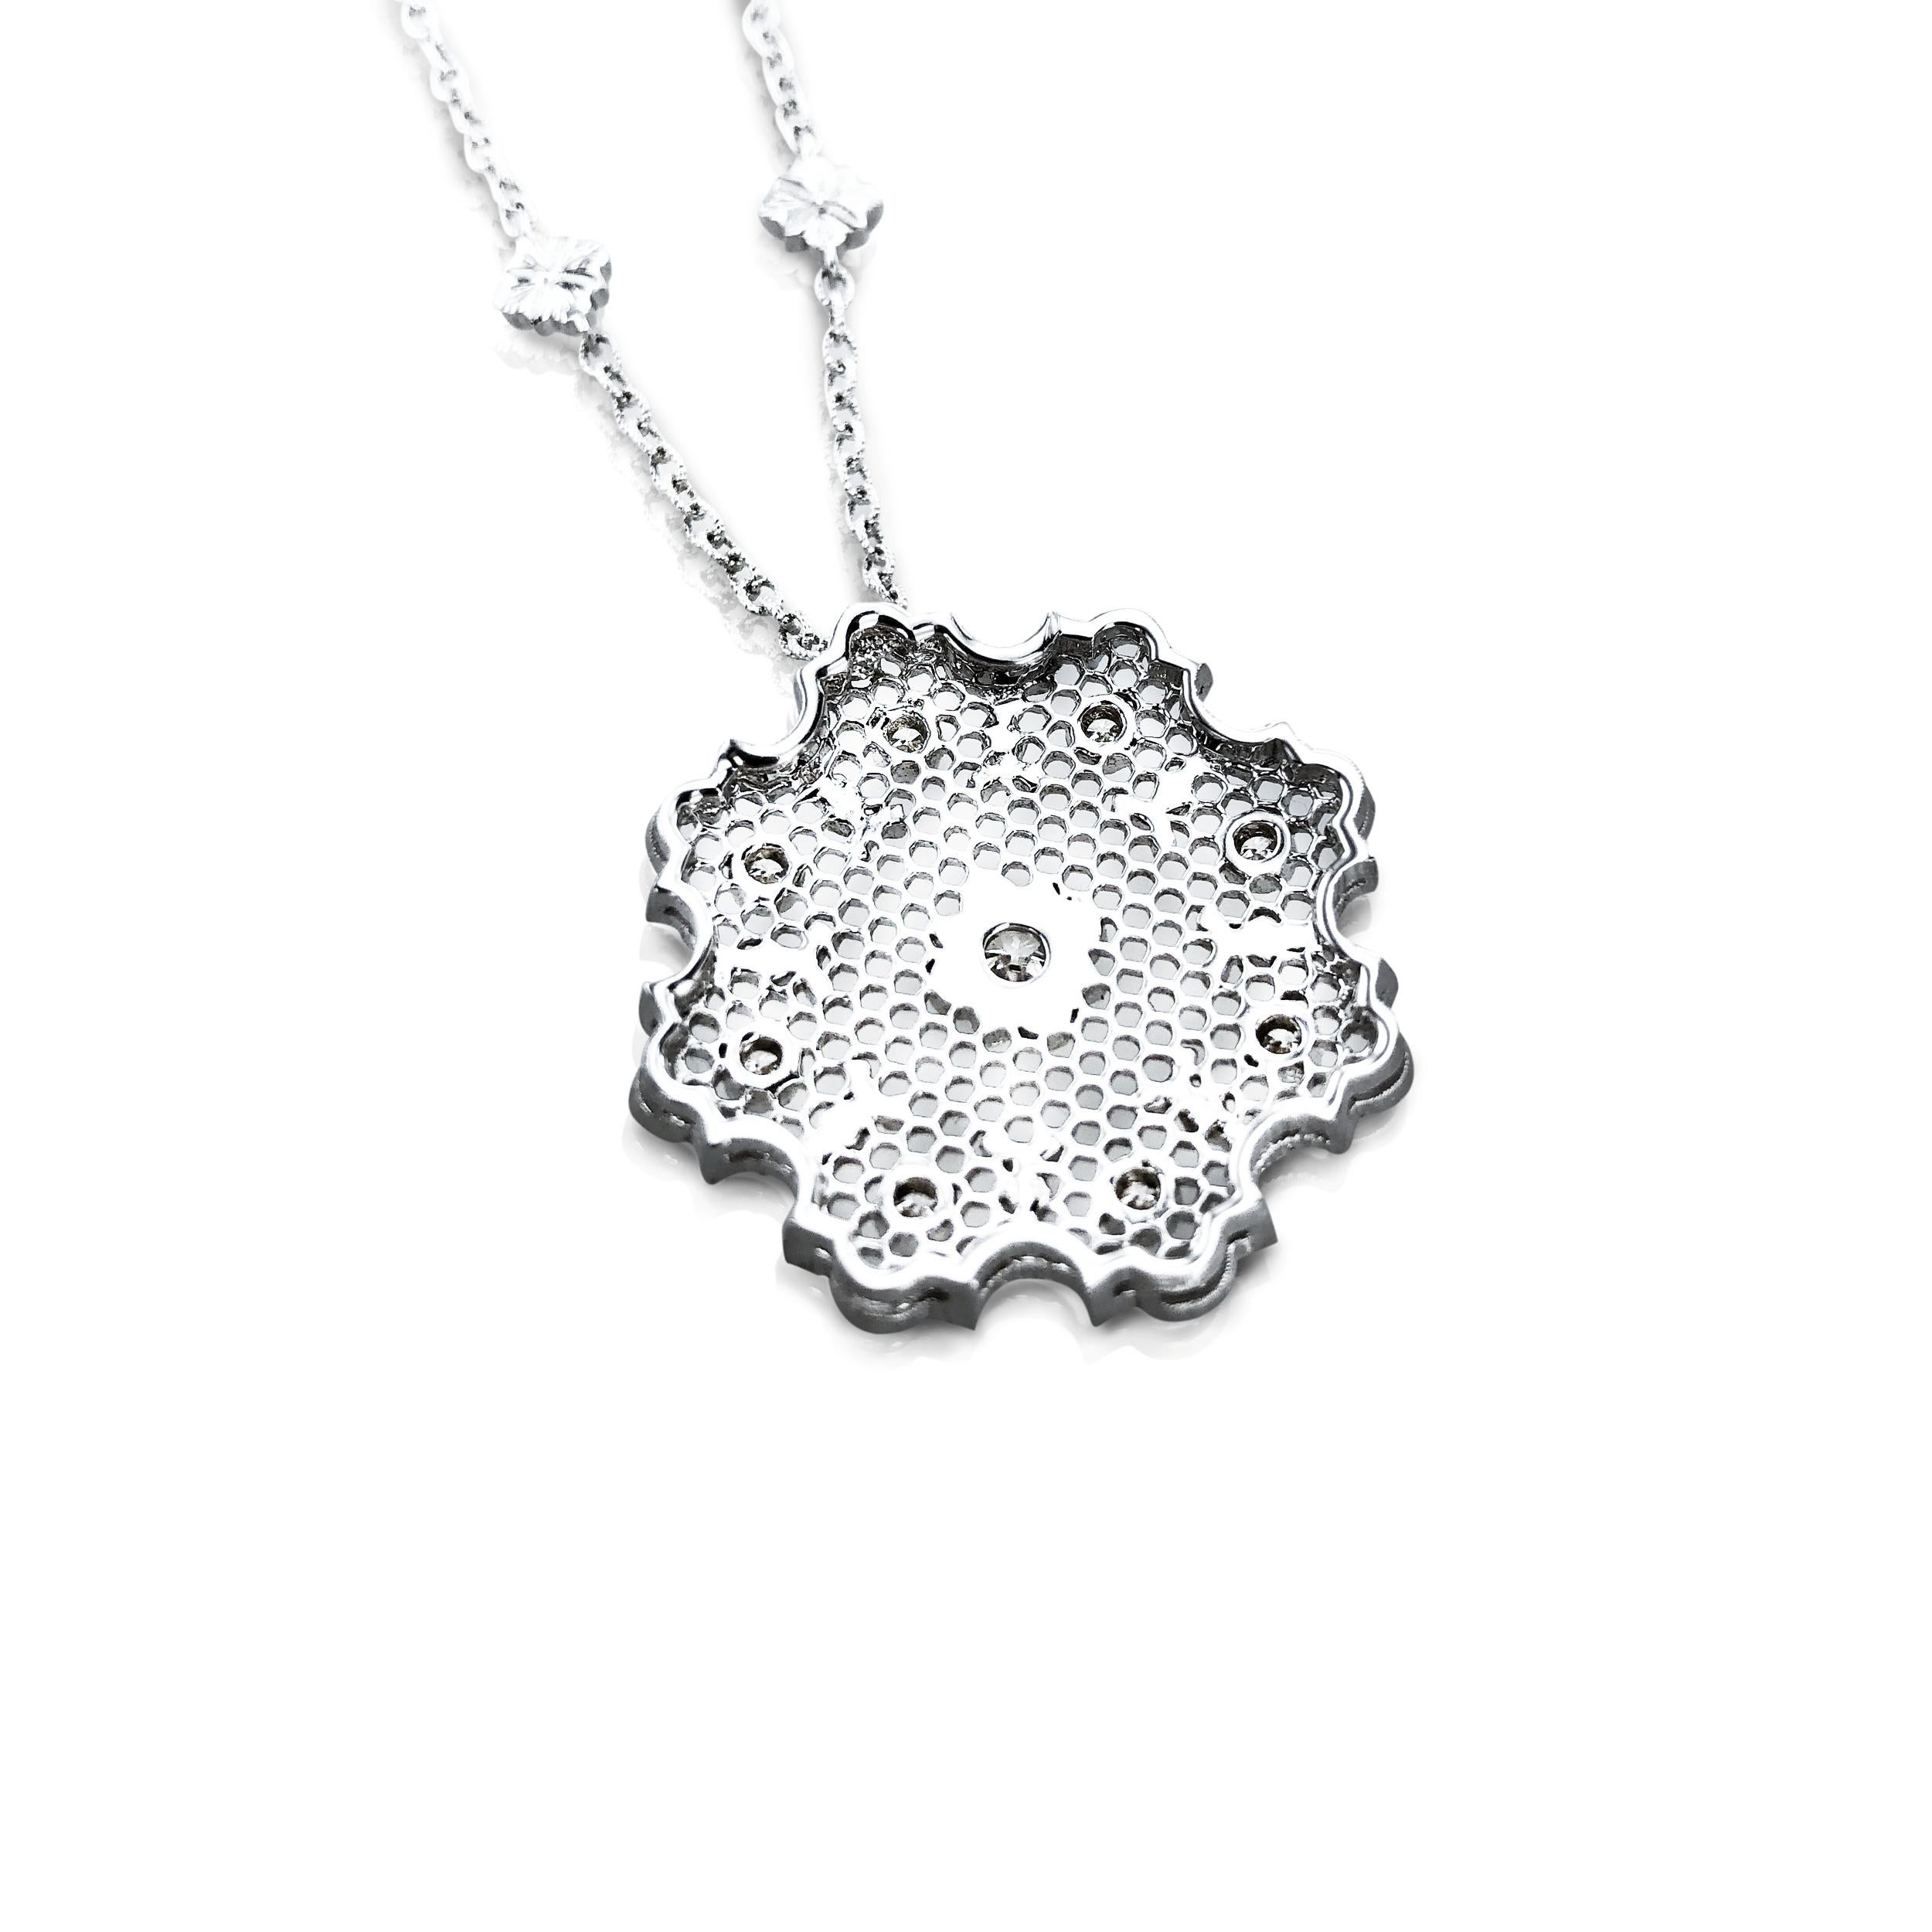 This 18Kt White Gold Diamond Pendant Necklace, is designed and inspired by Leonardo da Vinci drawings. 

The Octagon pendant is decorated with mini webbed pentagons and dressed with diamonds on each of the 8 corners and finished beautifully with a